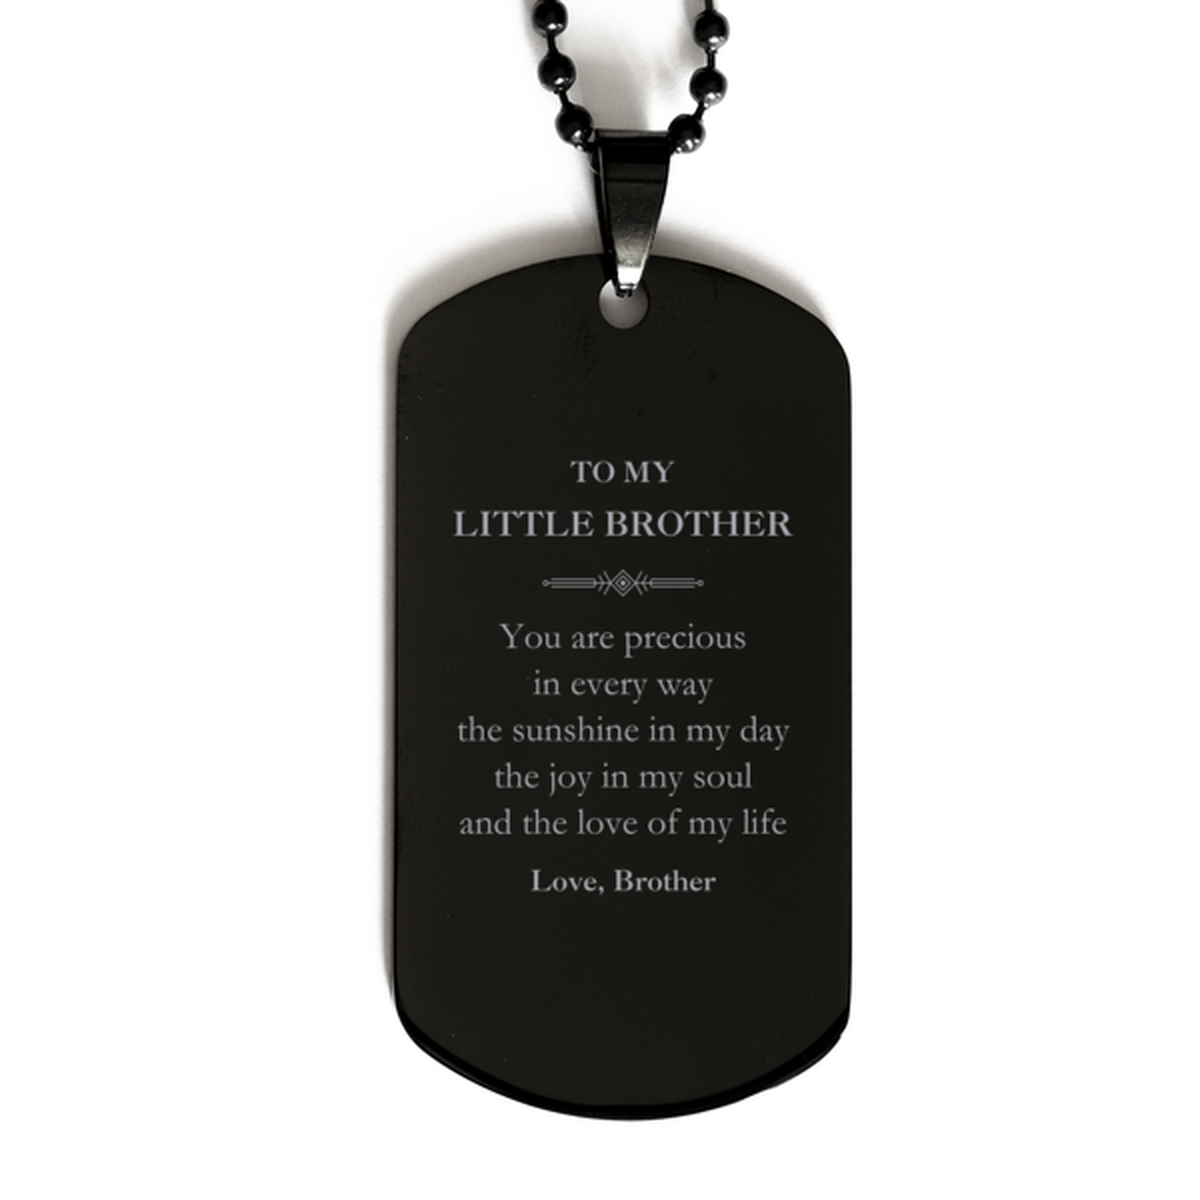 Graduation Gifts for Little Brother Black Dog Tag Present from Brother, Christmas Little Brother Birthday Gifts Little Brother You are precious in every way the sunshine in my day. Love, Brother